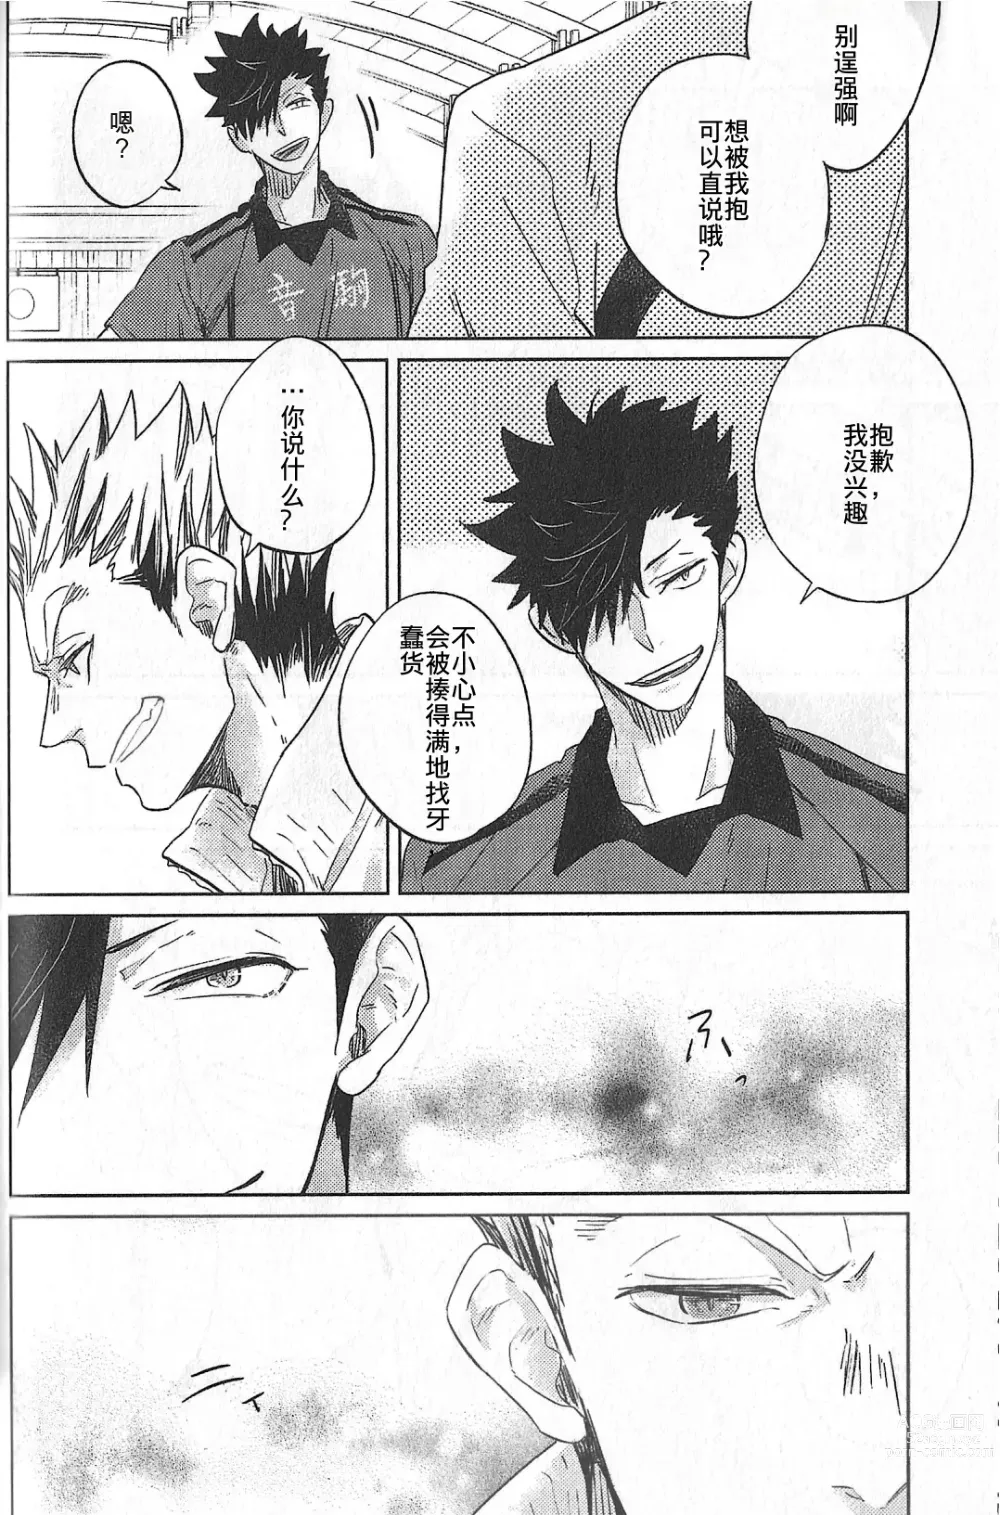 Page 23 of doujinshi 极境的野兽 后篇